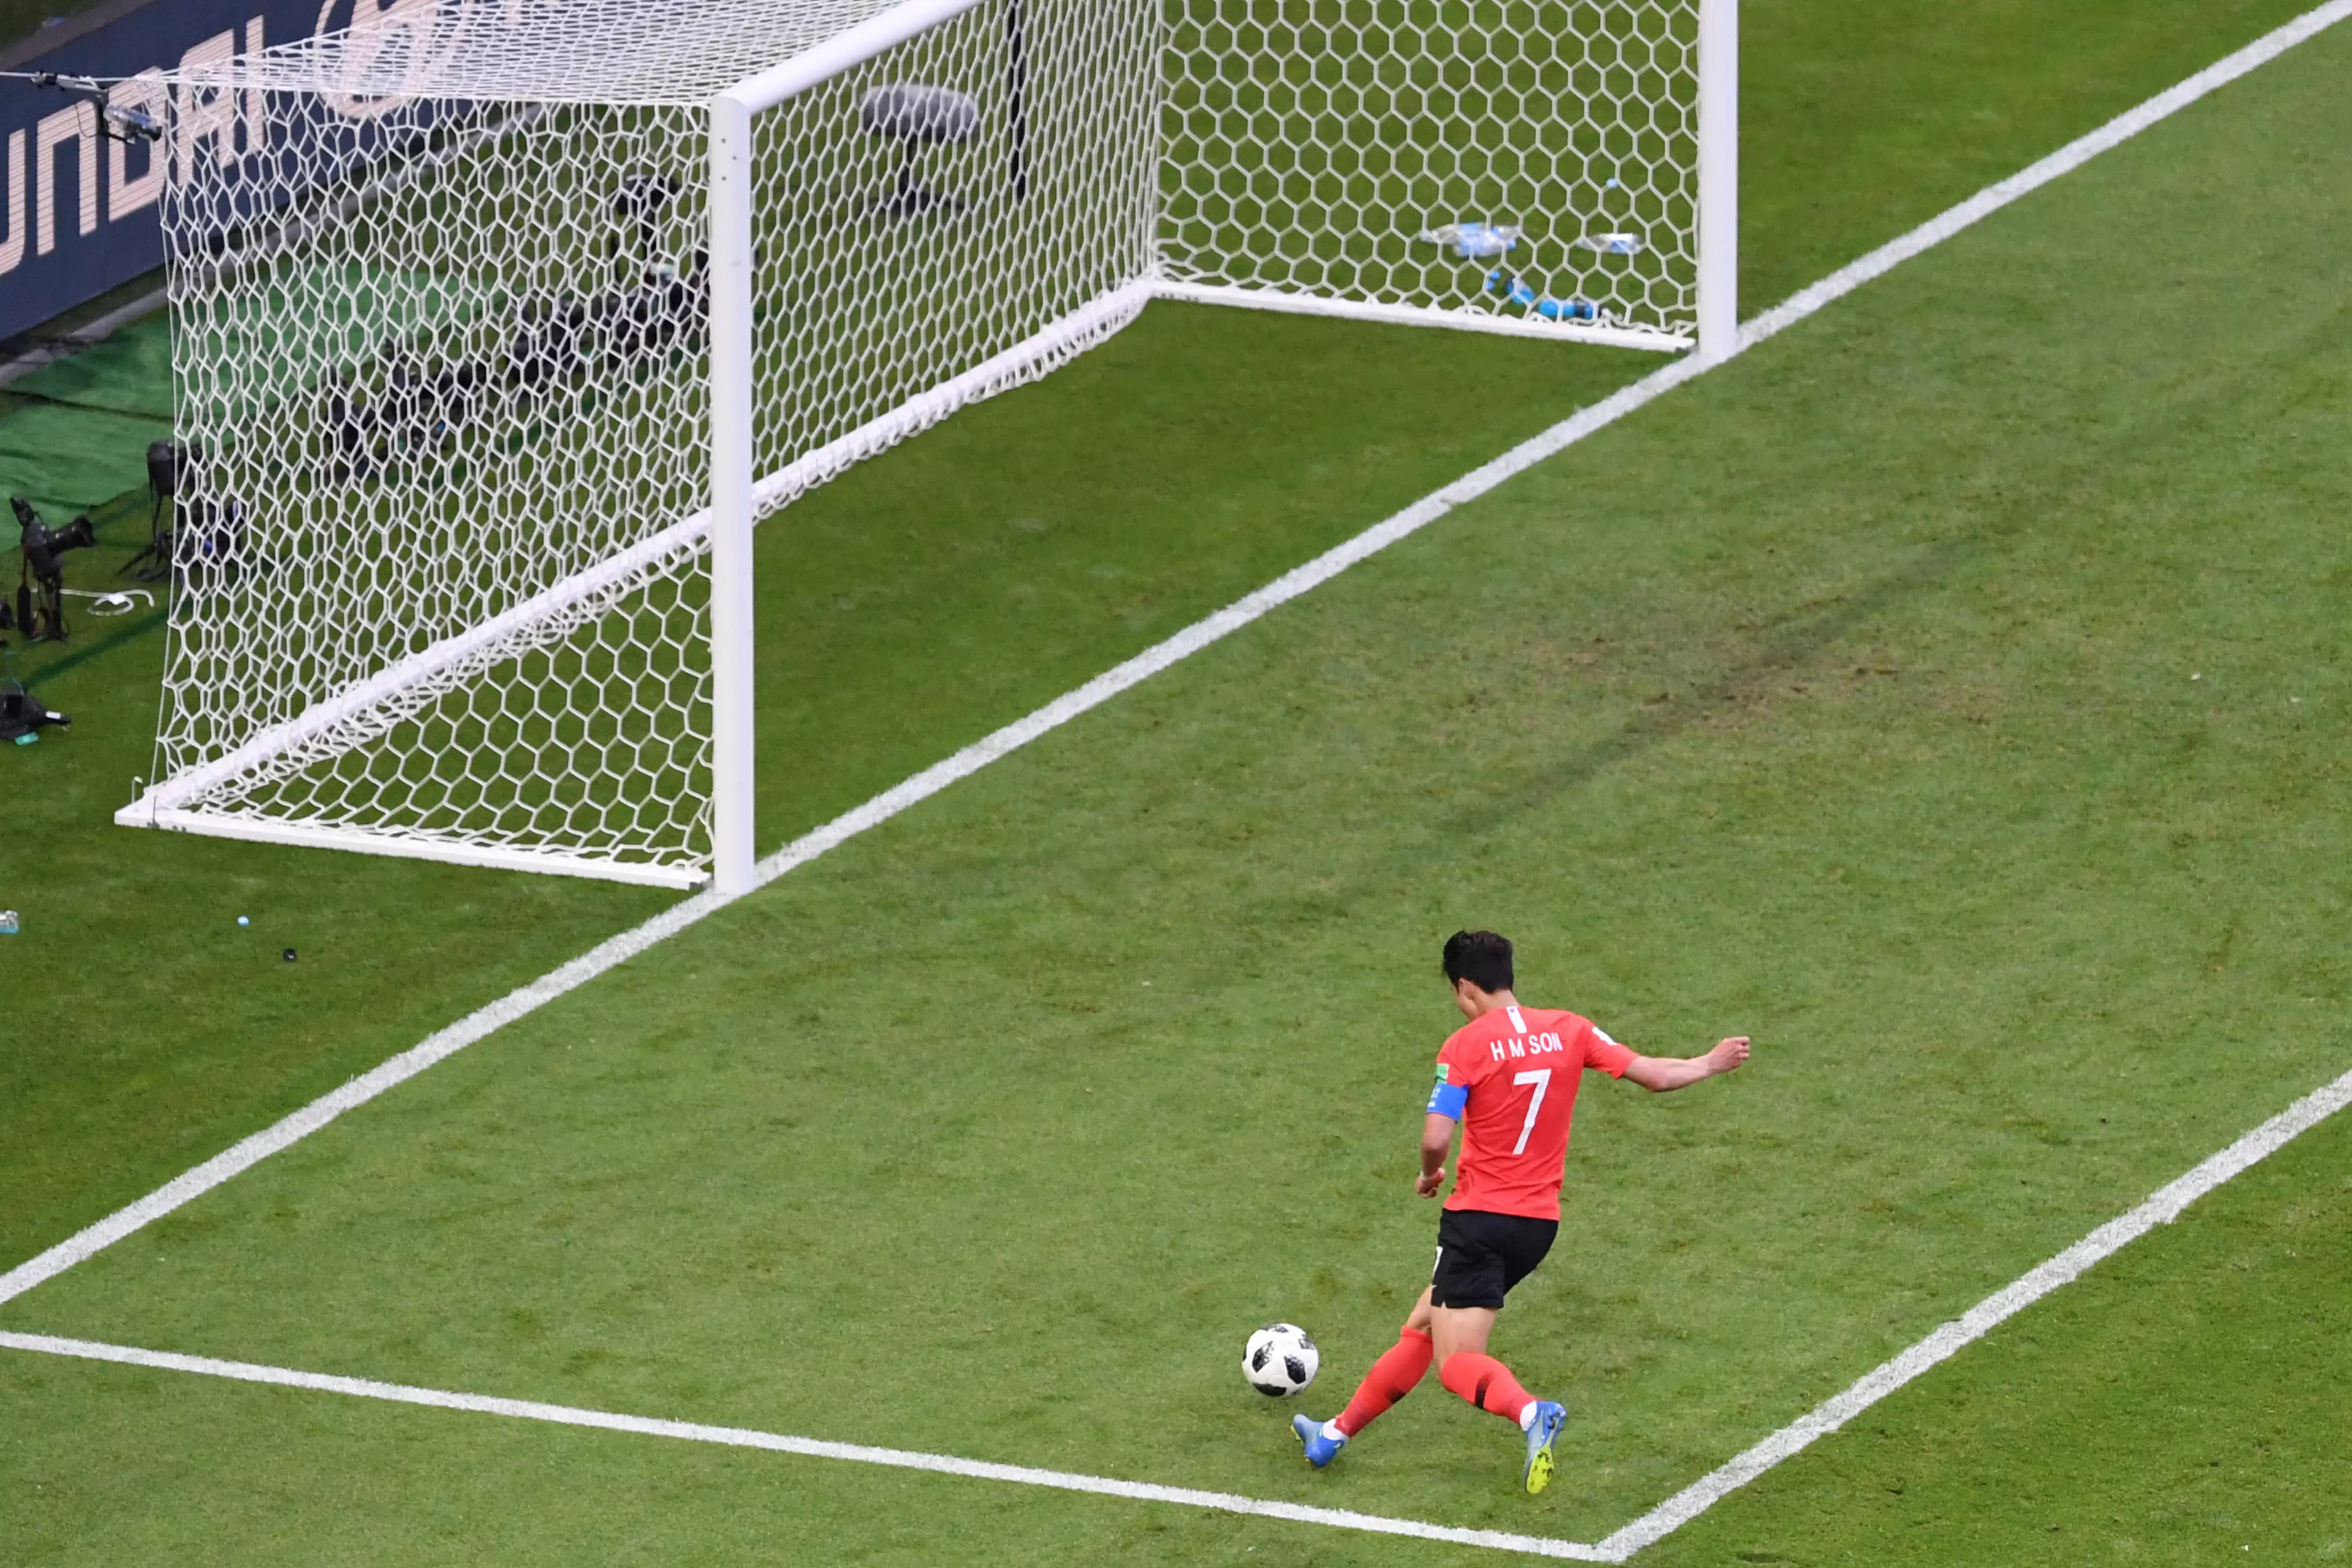 Son scoring against Germany in last summer's World Cup. Image: PA Images